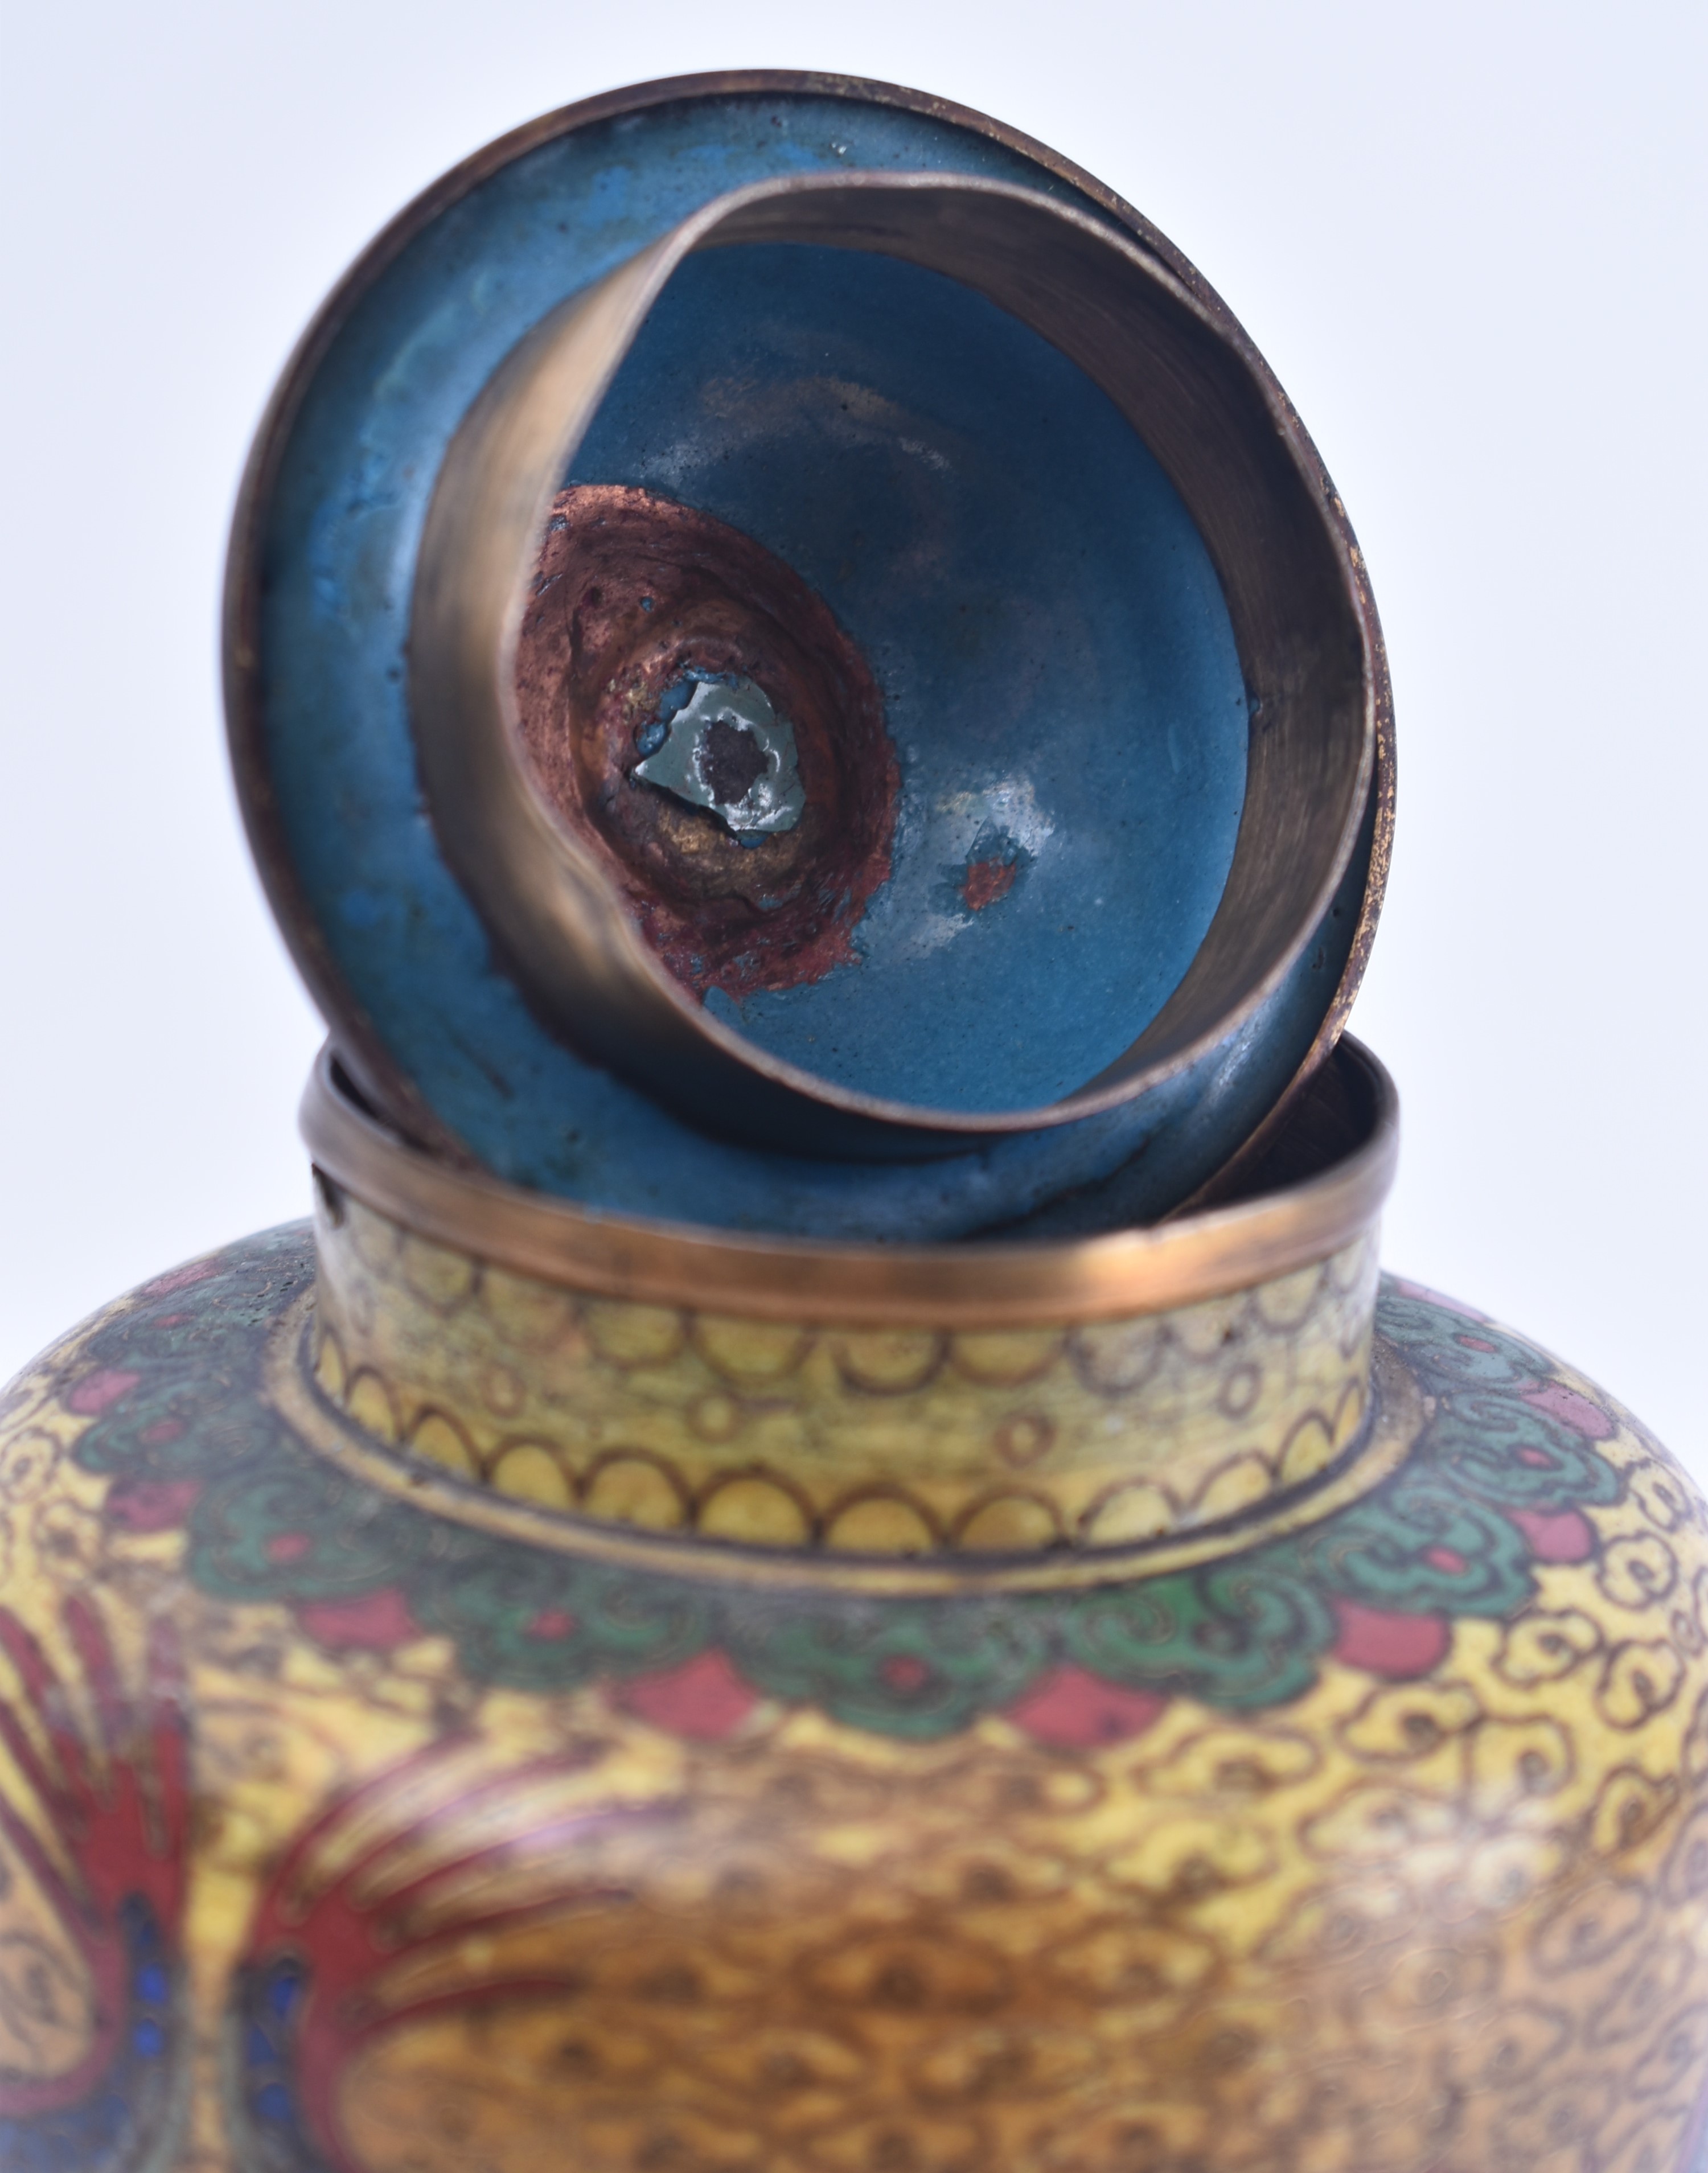 EARLY 20TH CENTURY CHINESE CLOISONNE LIDDED VASE - Image 4 of 6